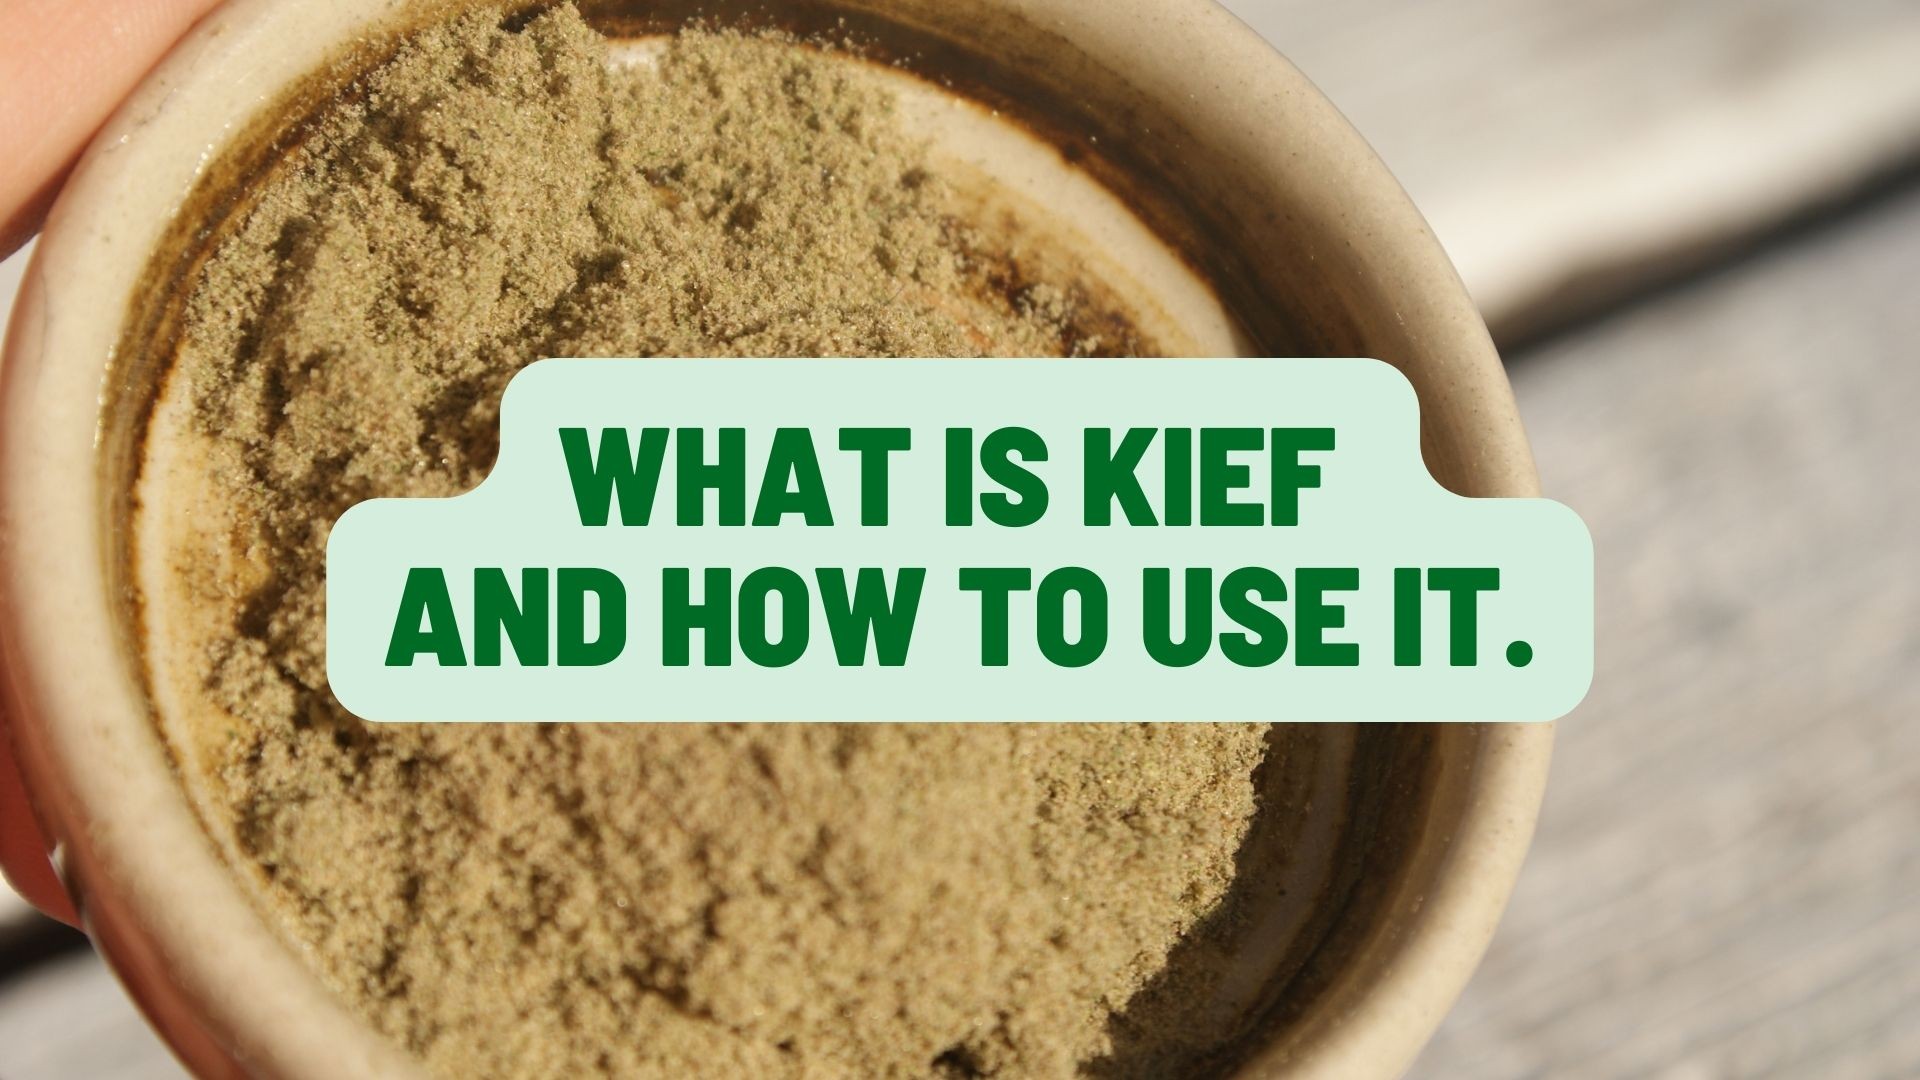 What is Kief and how to use it